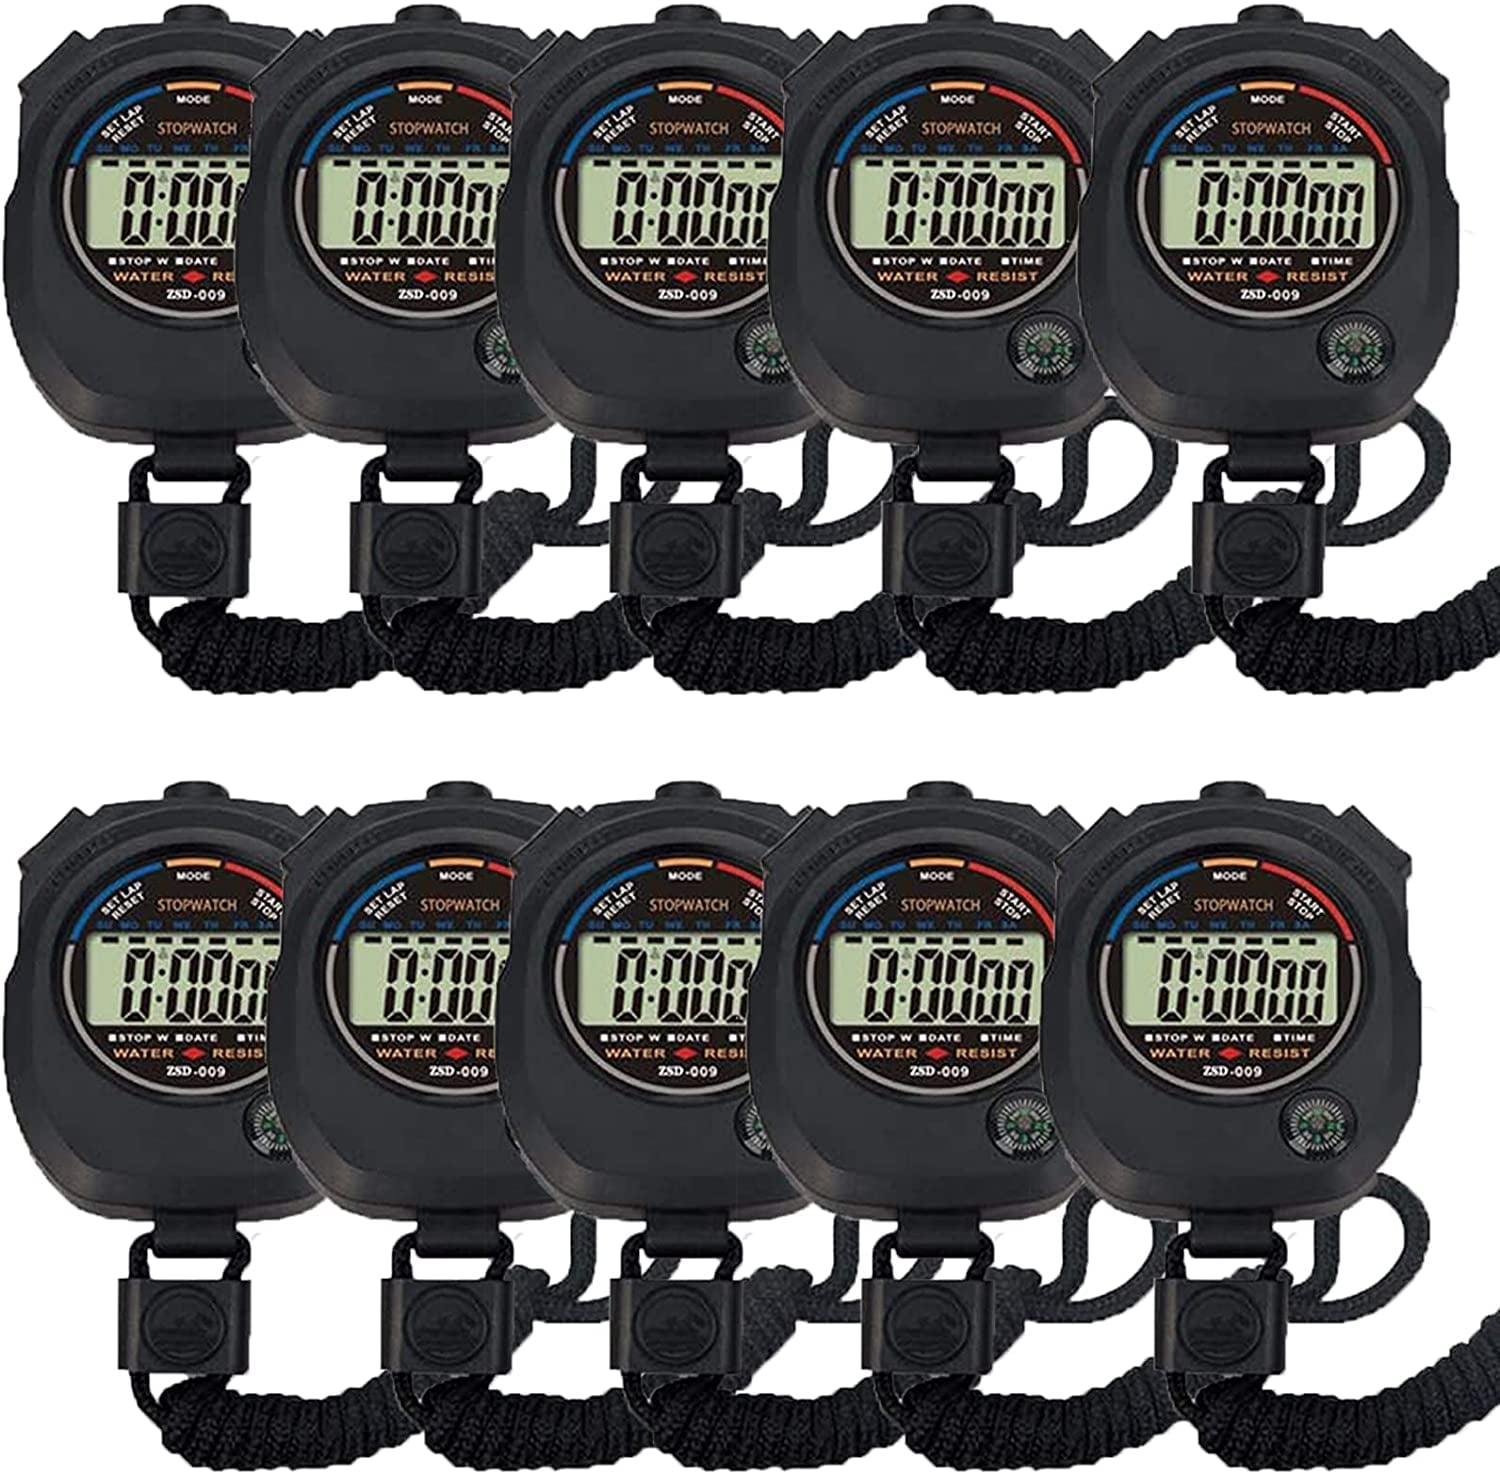 10 PCS Multi-Function Electronic Digital Stopwatch Large Display with Date Time and Alarm Function,Suitable for Sports Coaches Fitness and Referees - Walmart.com